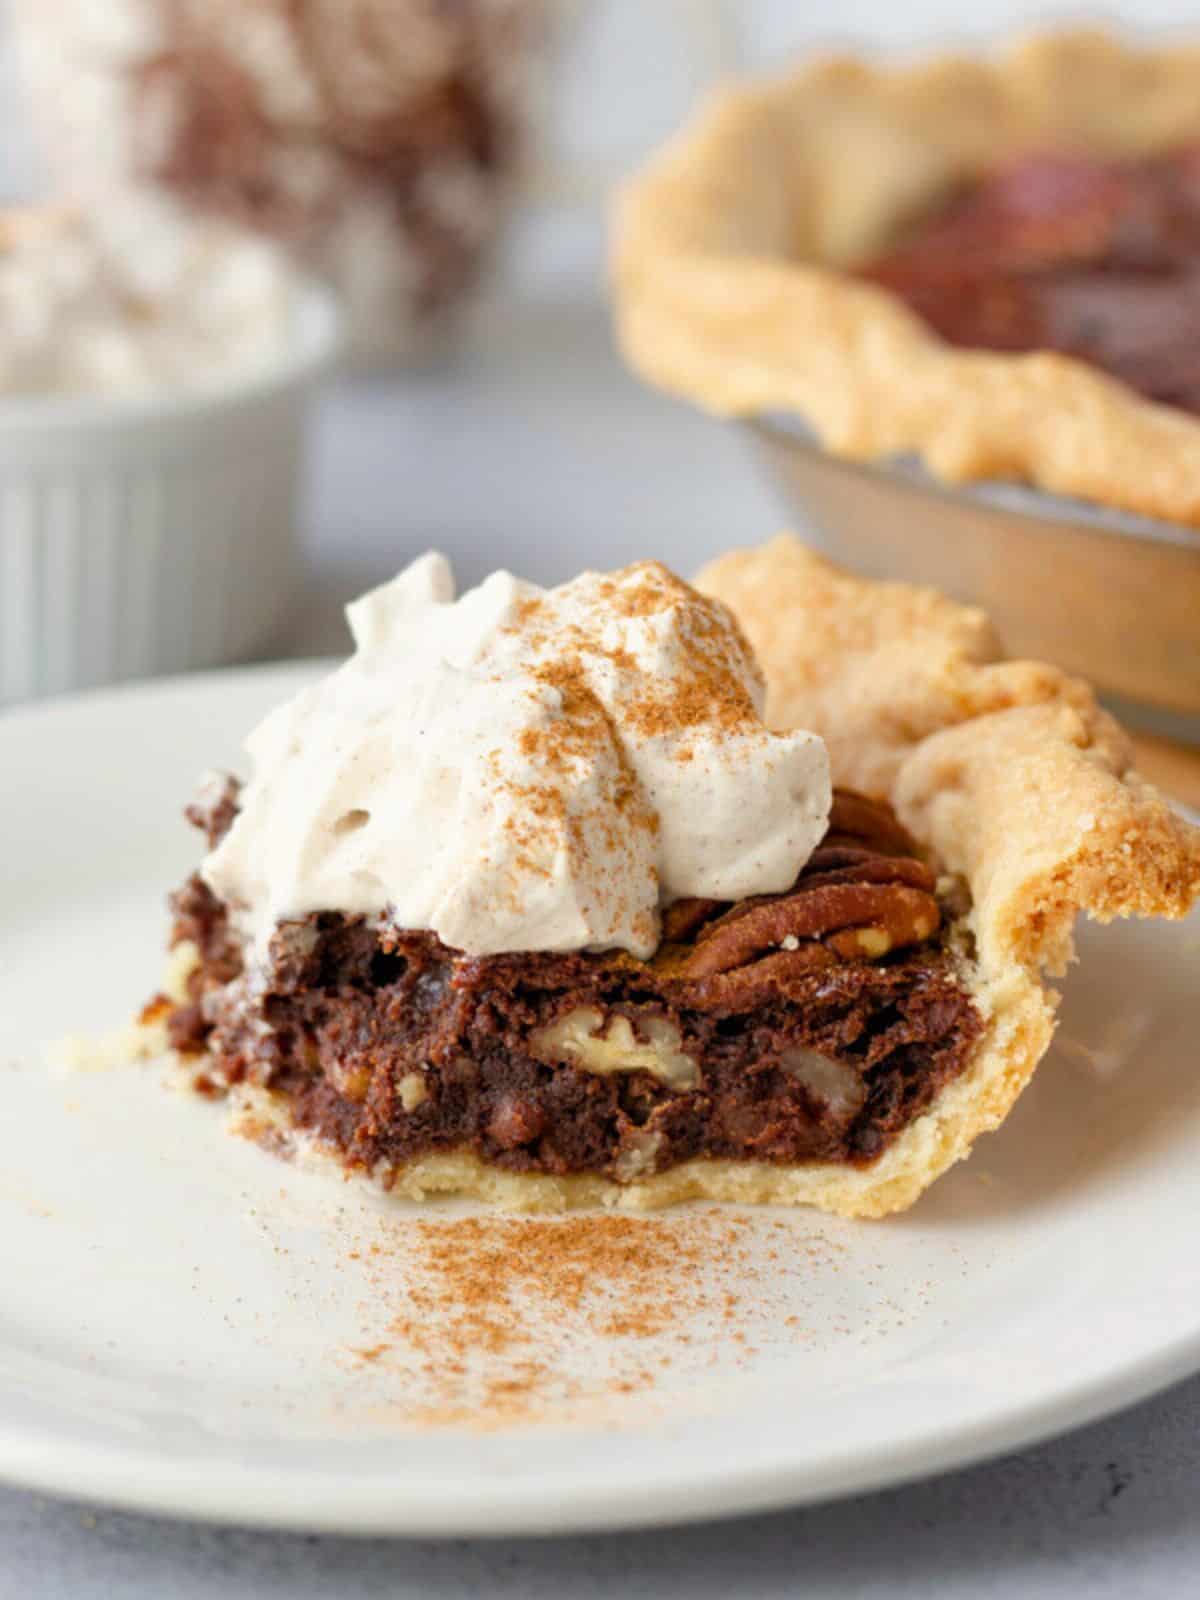 A slice of chocolate pecan pie on a plate with a dollop of whipped cream.